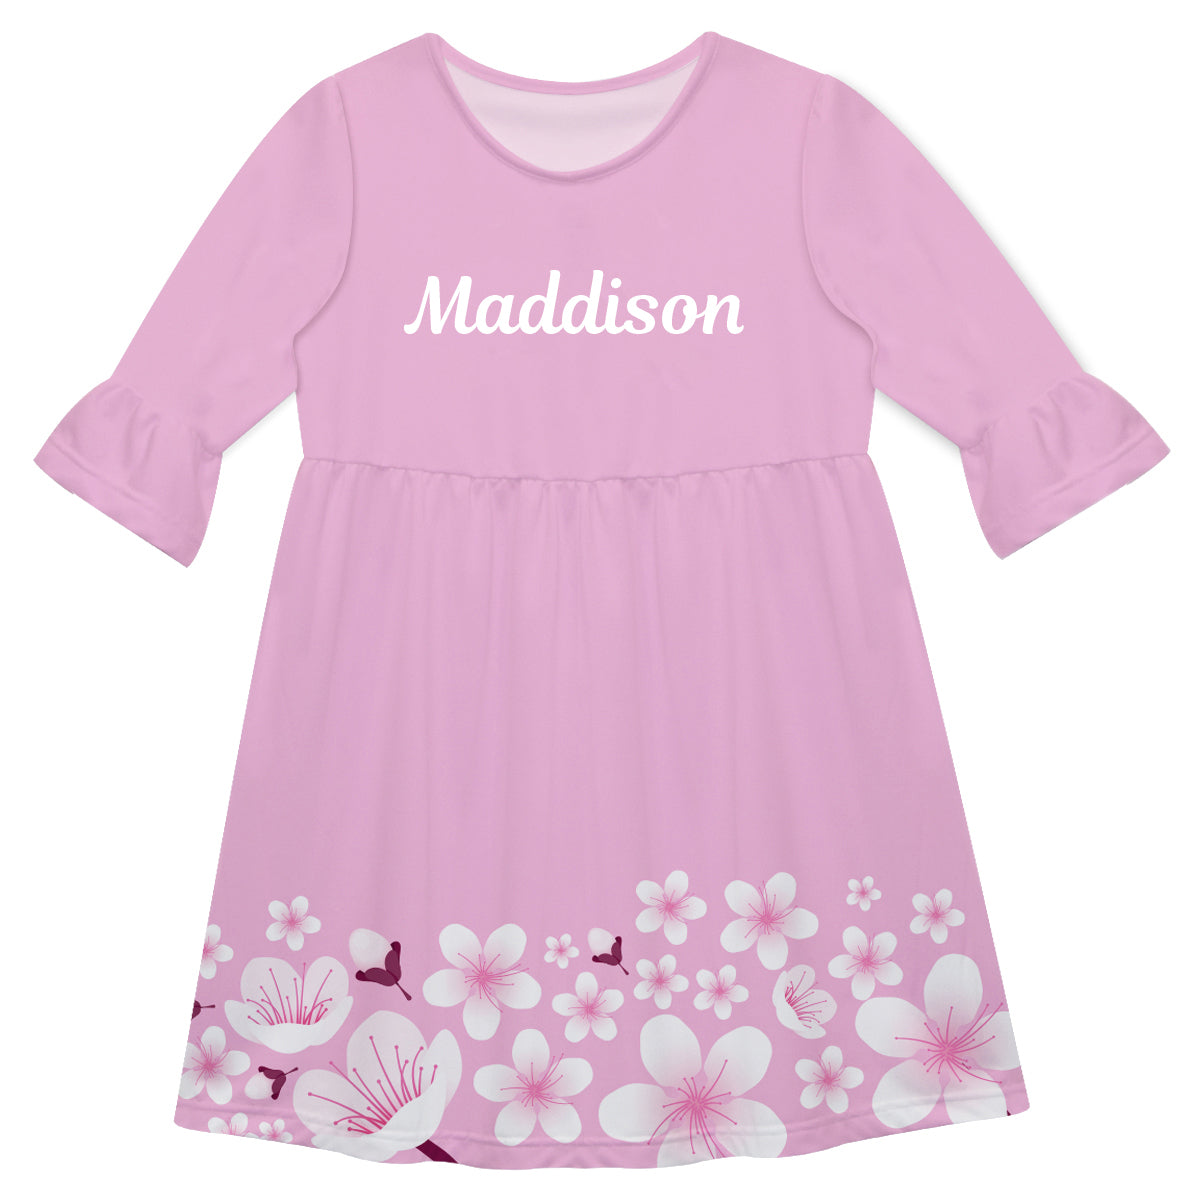 Girls pink and white flowers dress with name - Wimziy&Co.